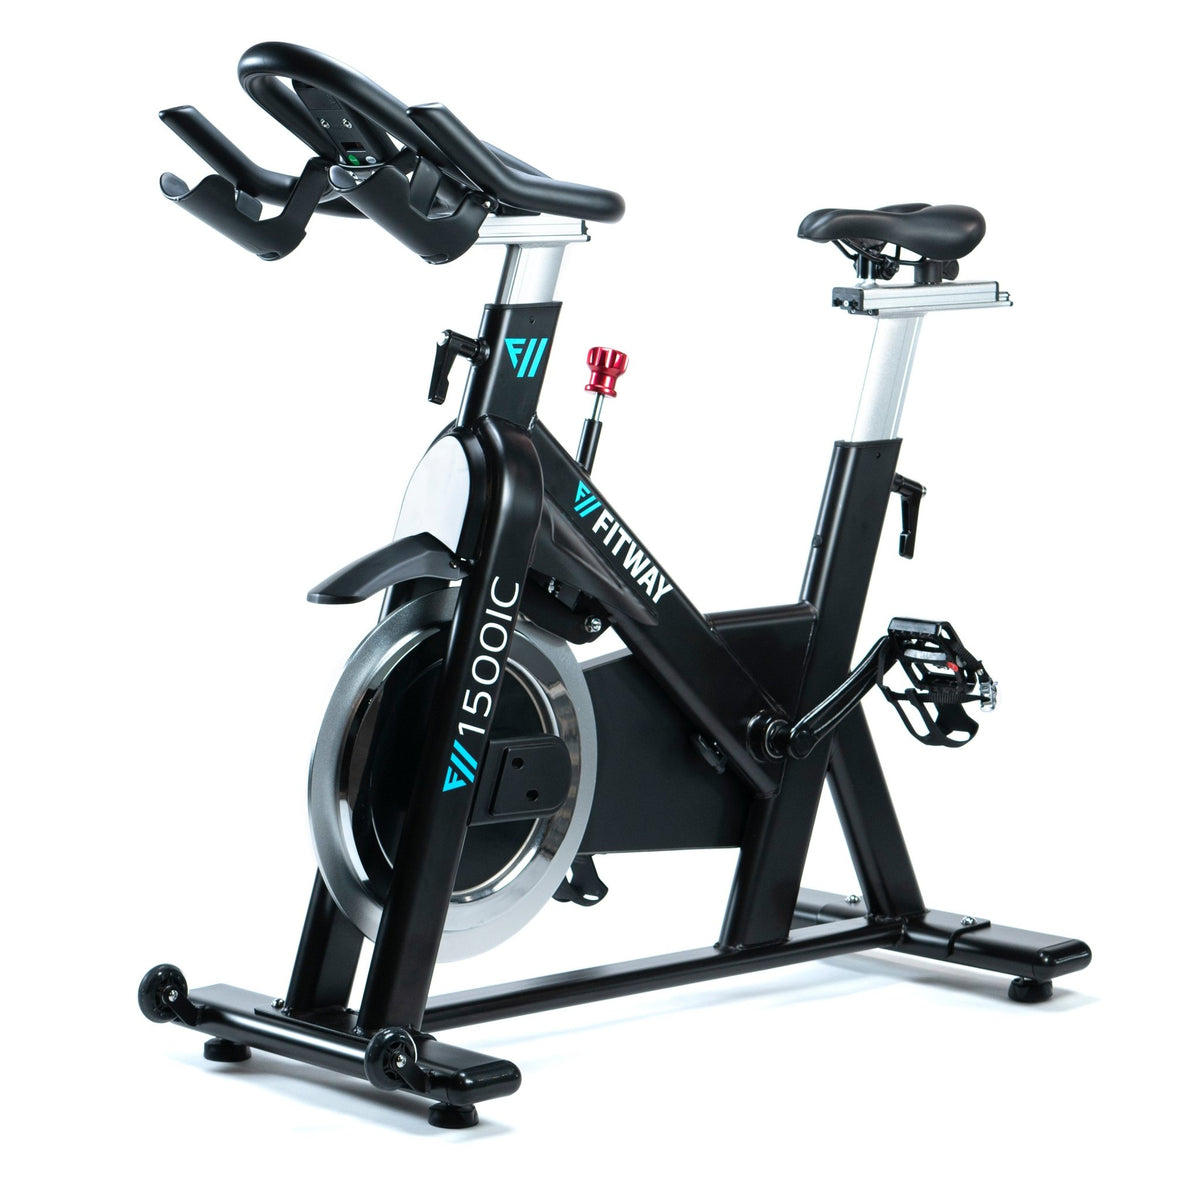 FitWay Equip. 1500IC Indoor Cycle - Angle 9